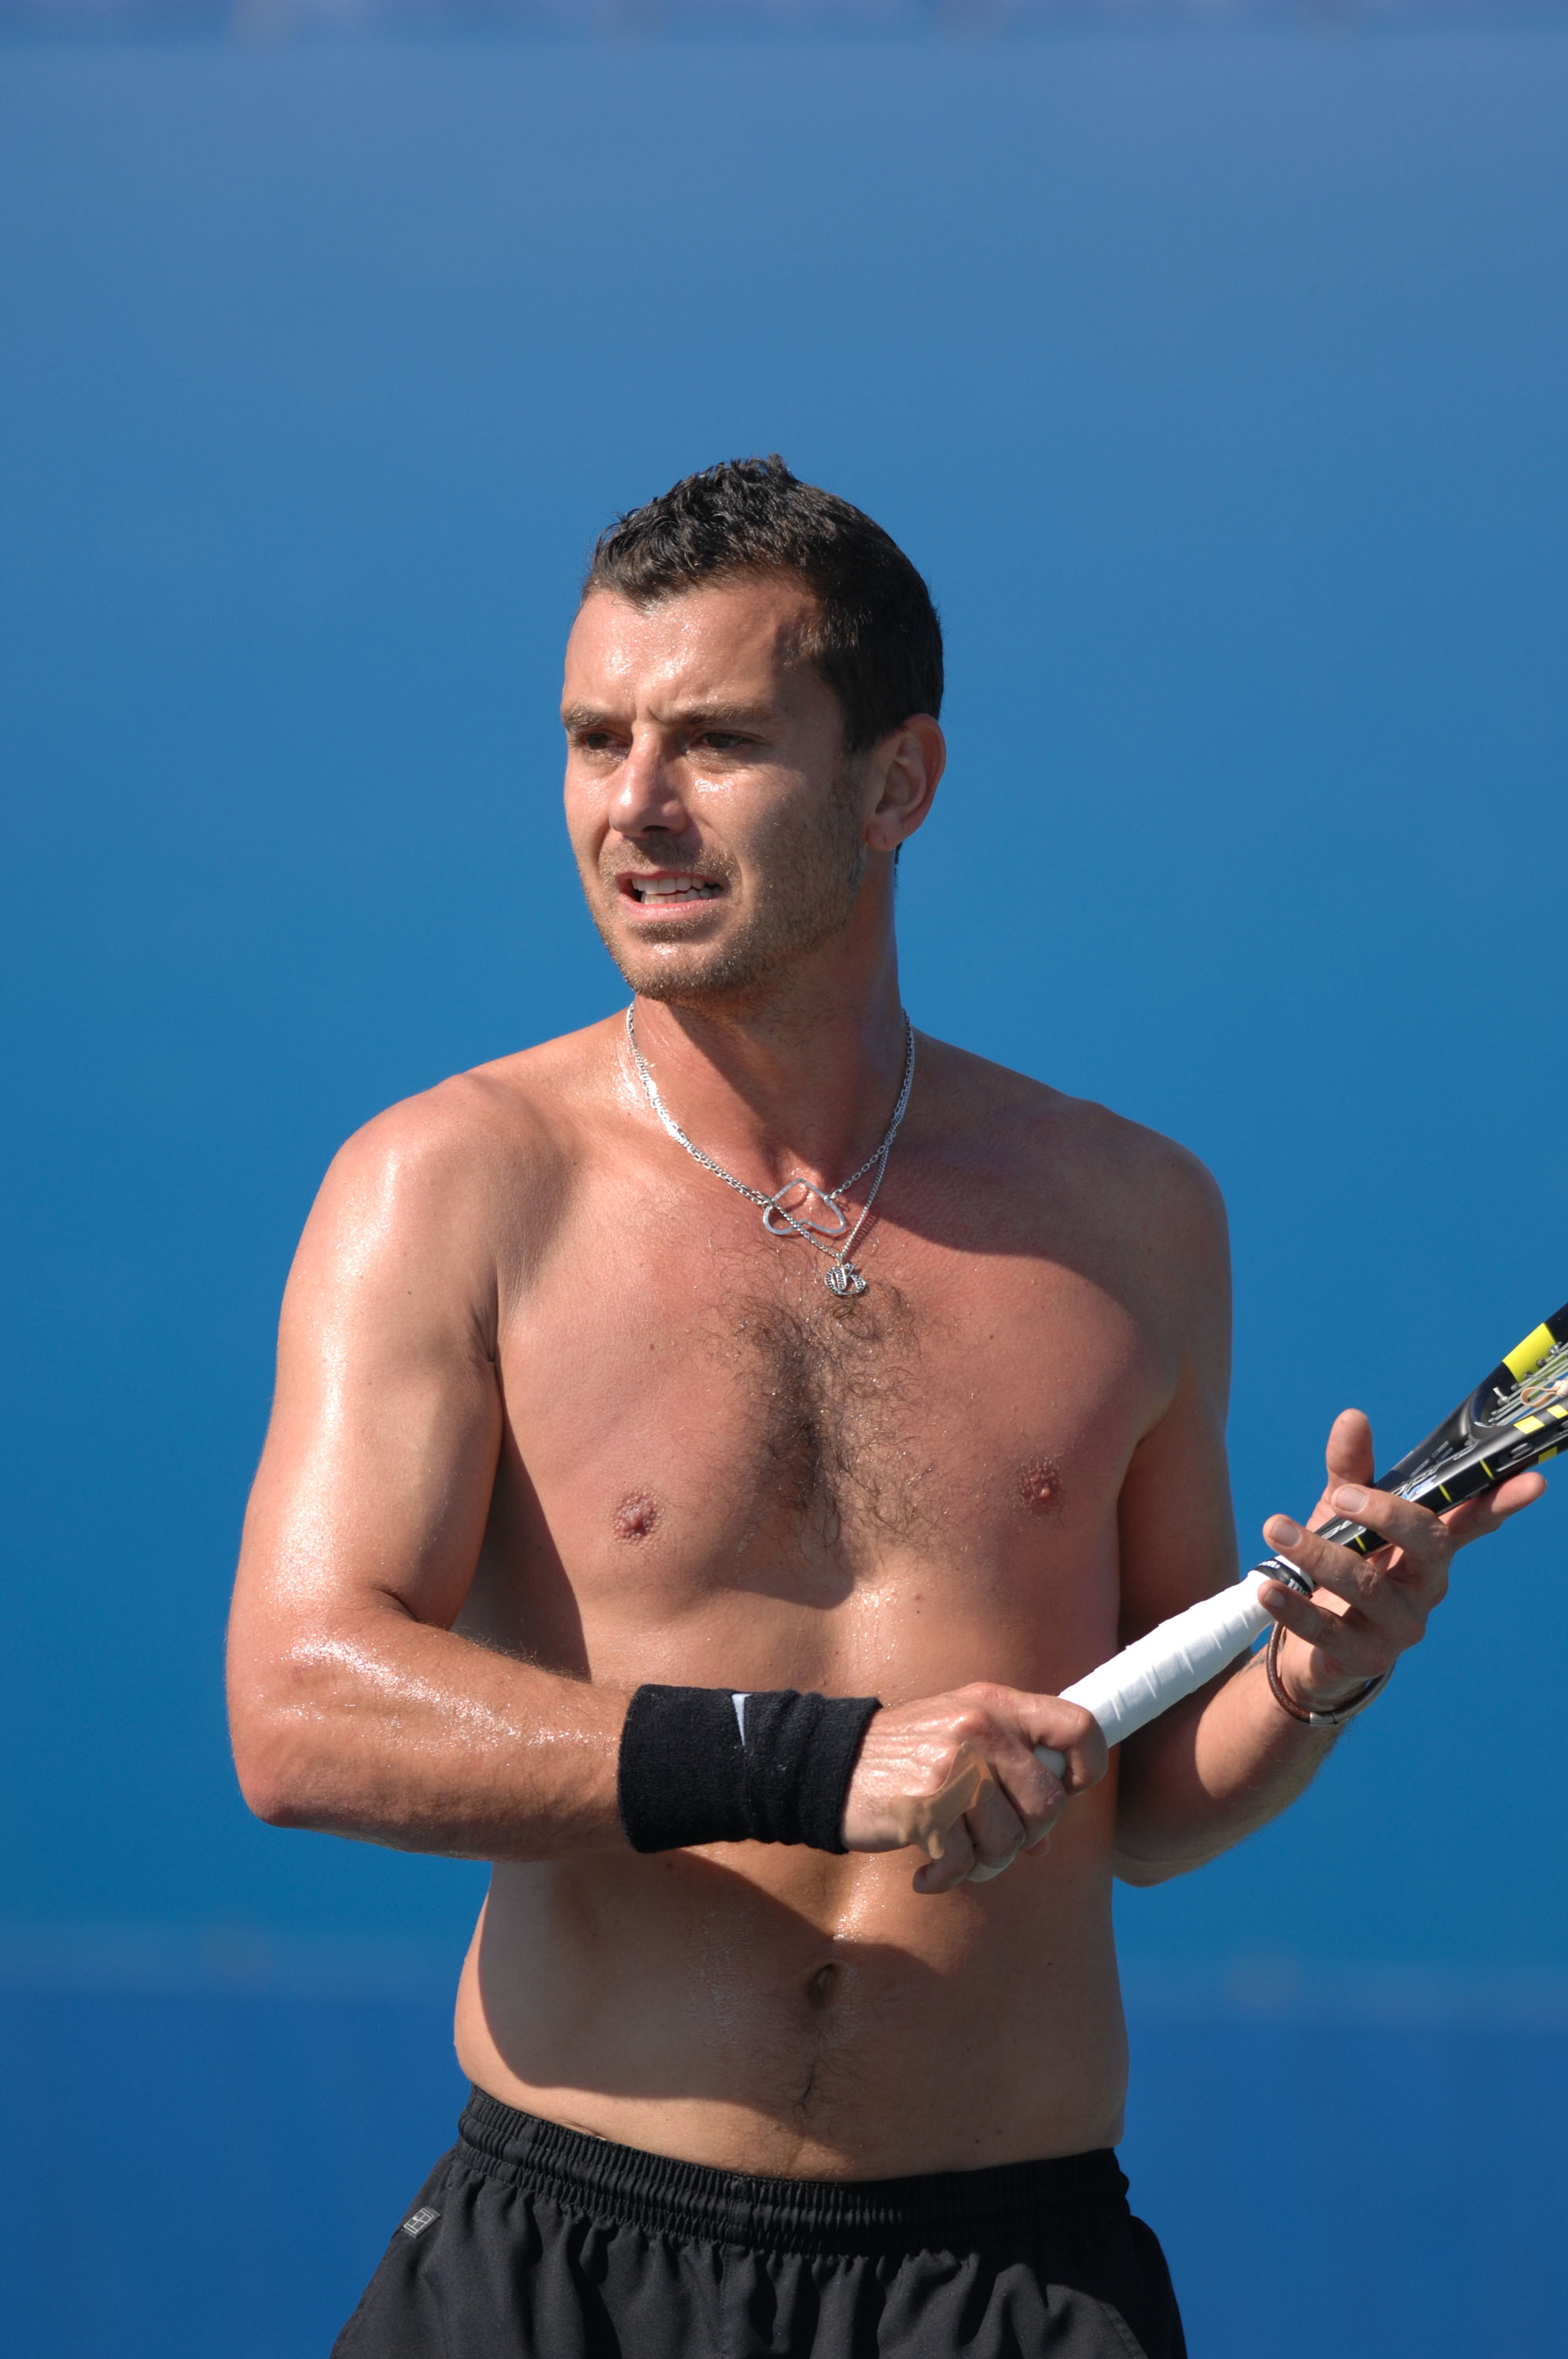 Gavin Rossdale during tennis practice on November 4, 2007, in Delray Beach, Florida. | Source: Getty Images